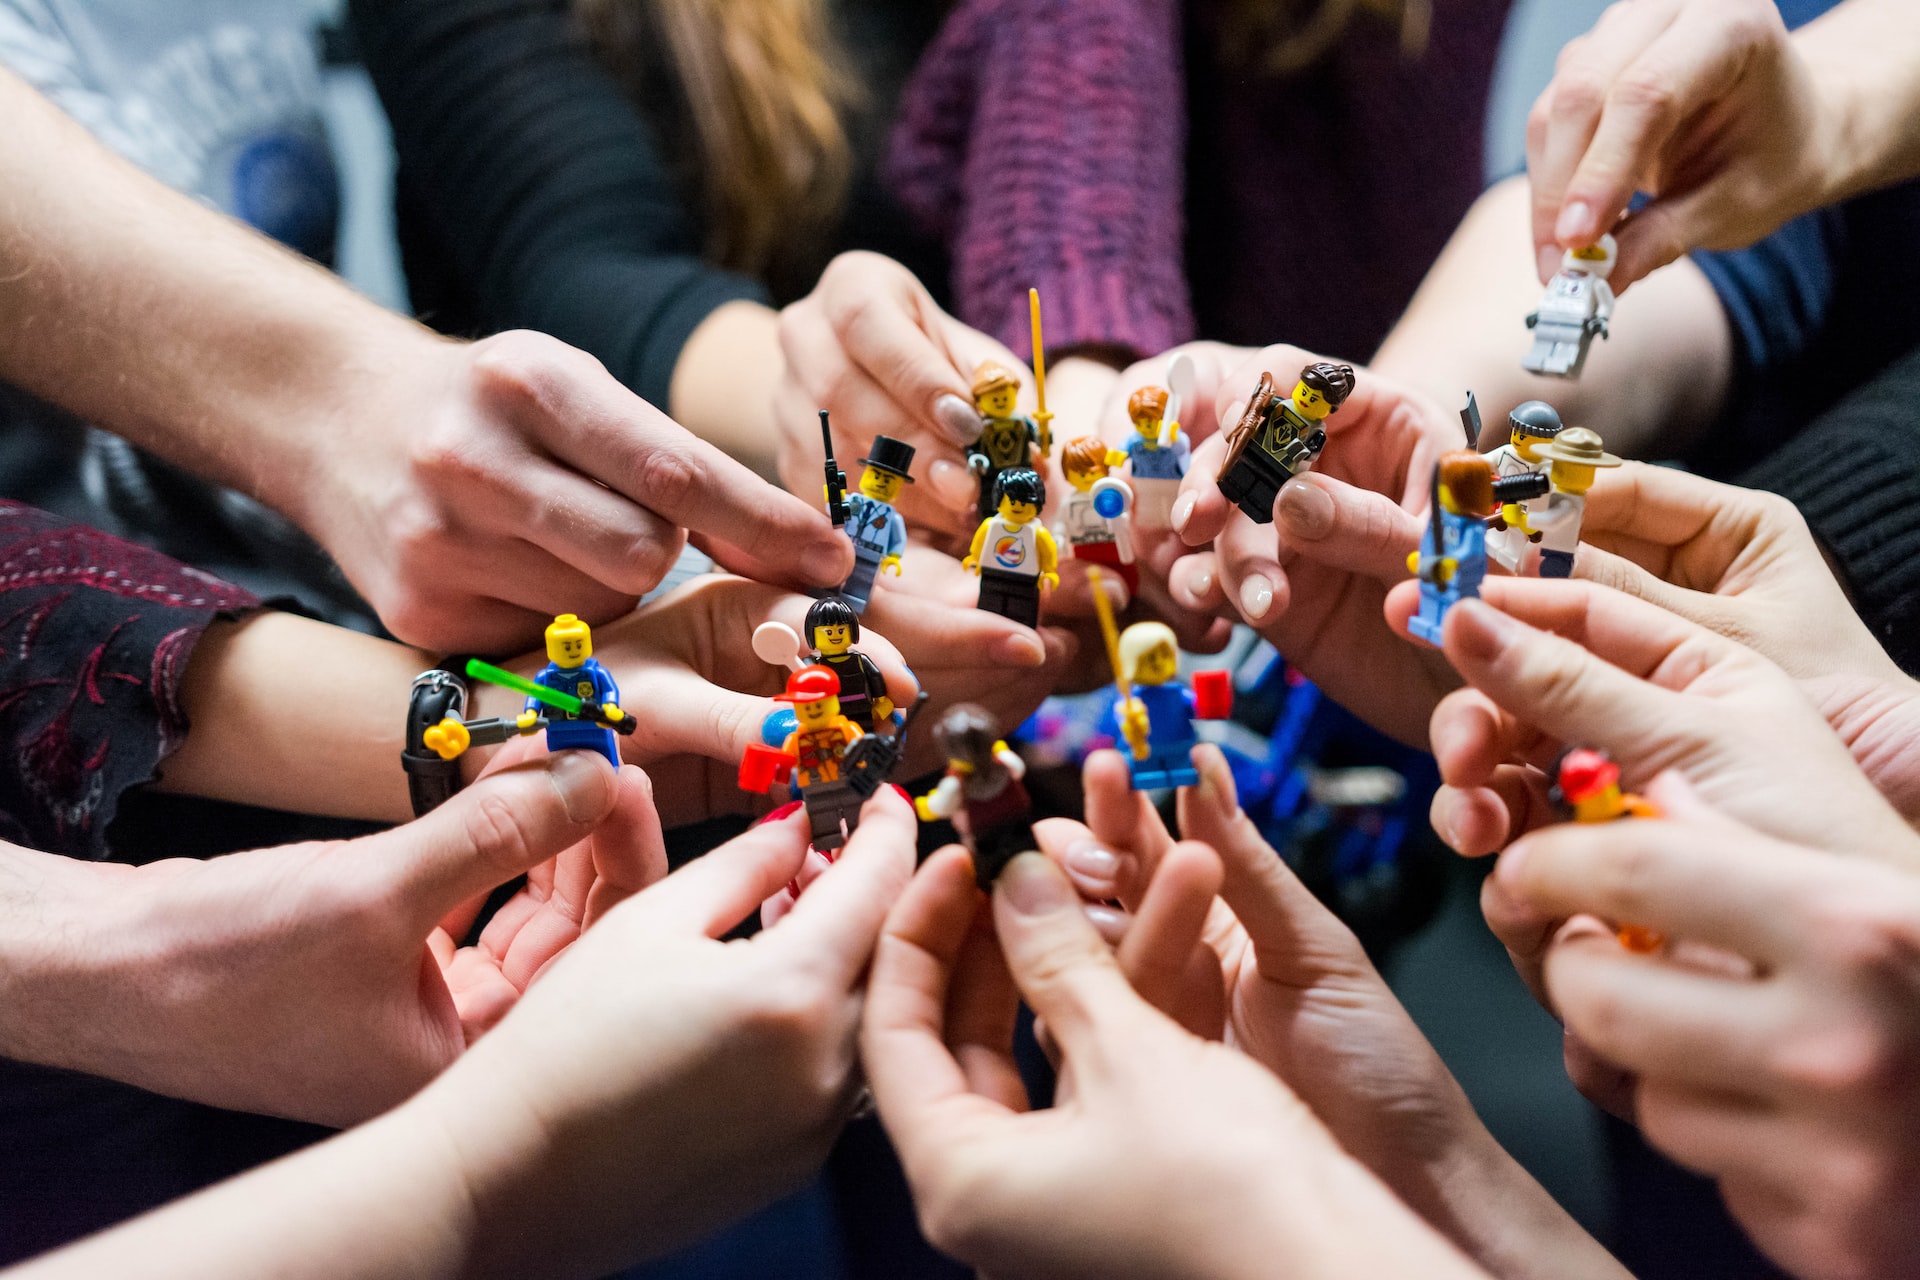 Team of people, holding lego figs together